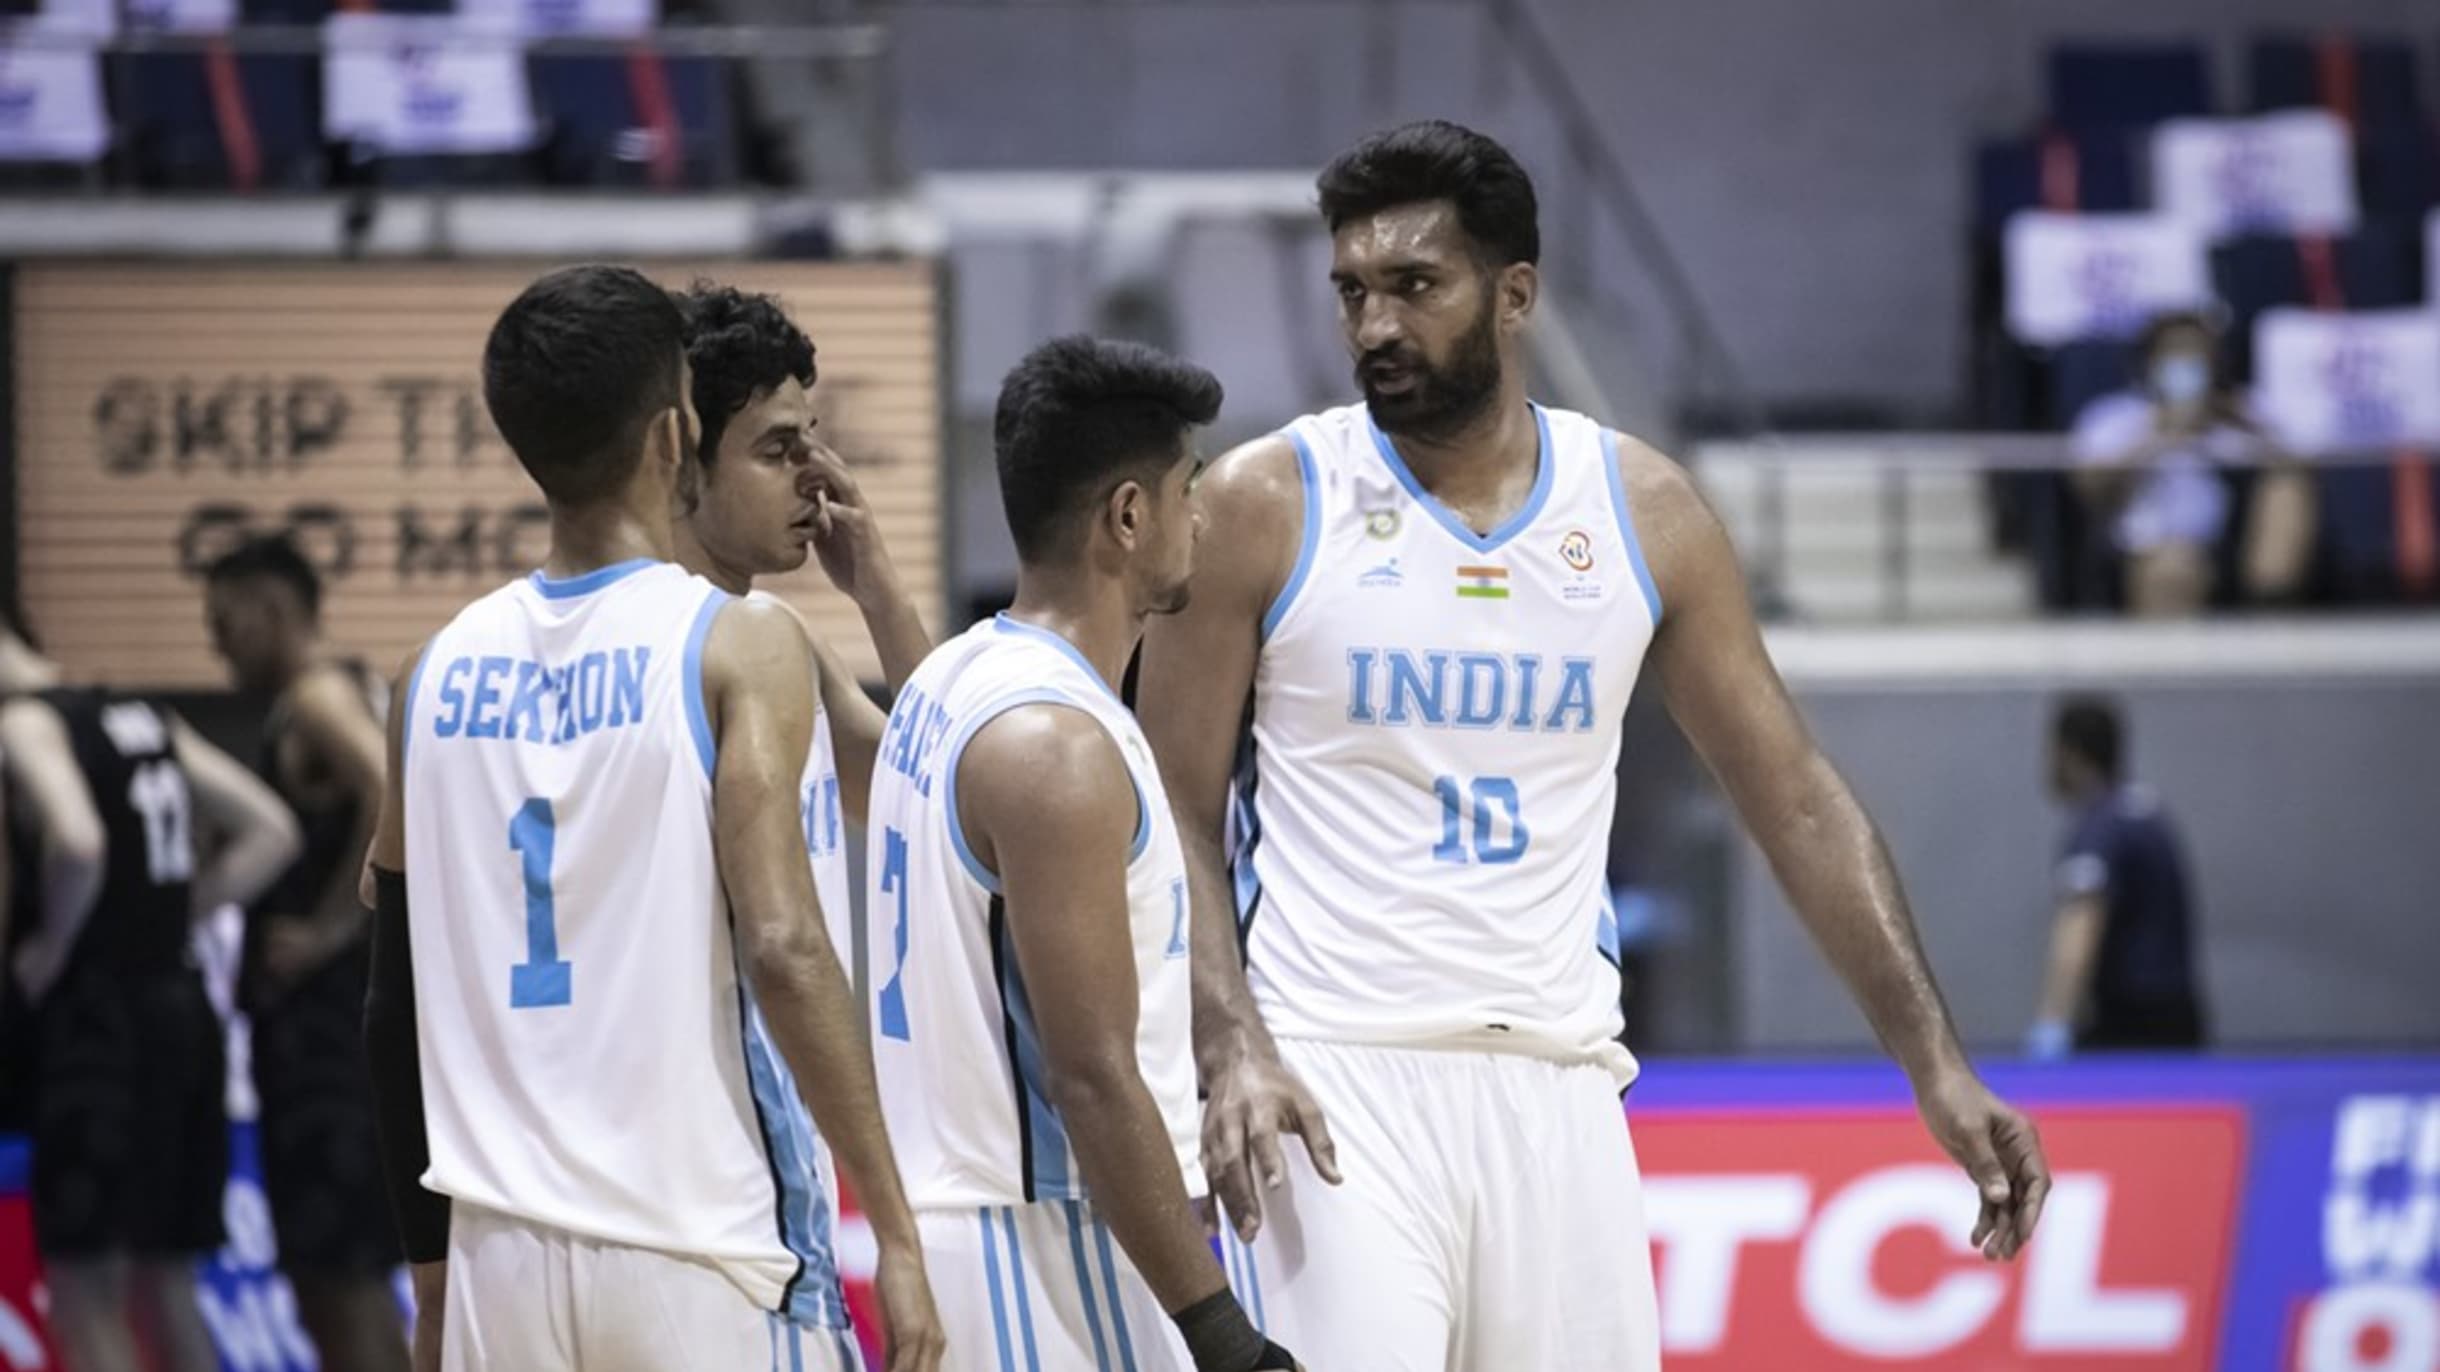 India vs Philippines, FIBA Basketball World Cup 2023 Asian Qualifiers Watch live streaming in India